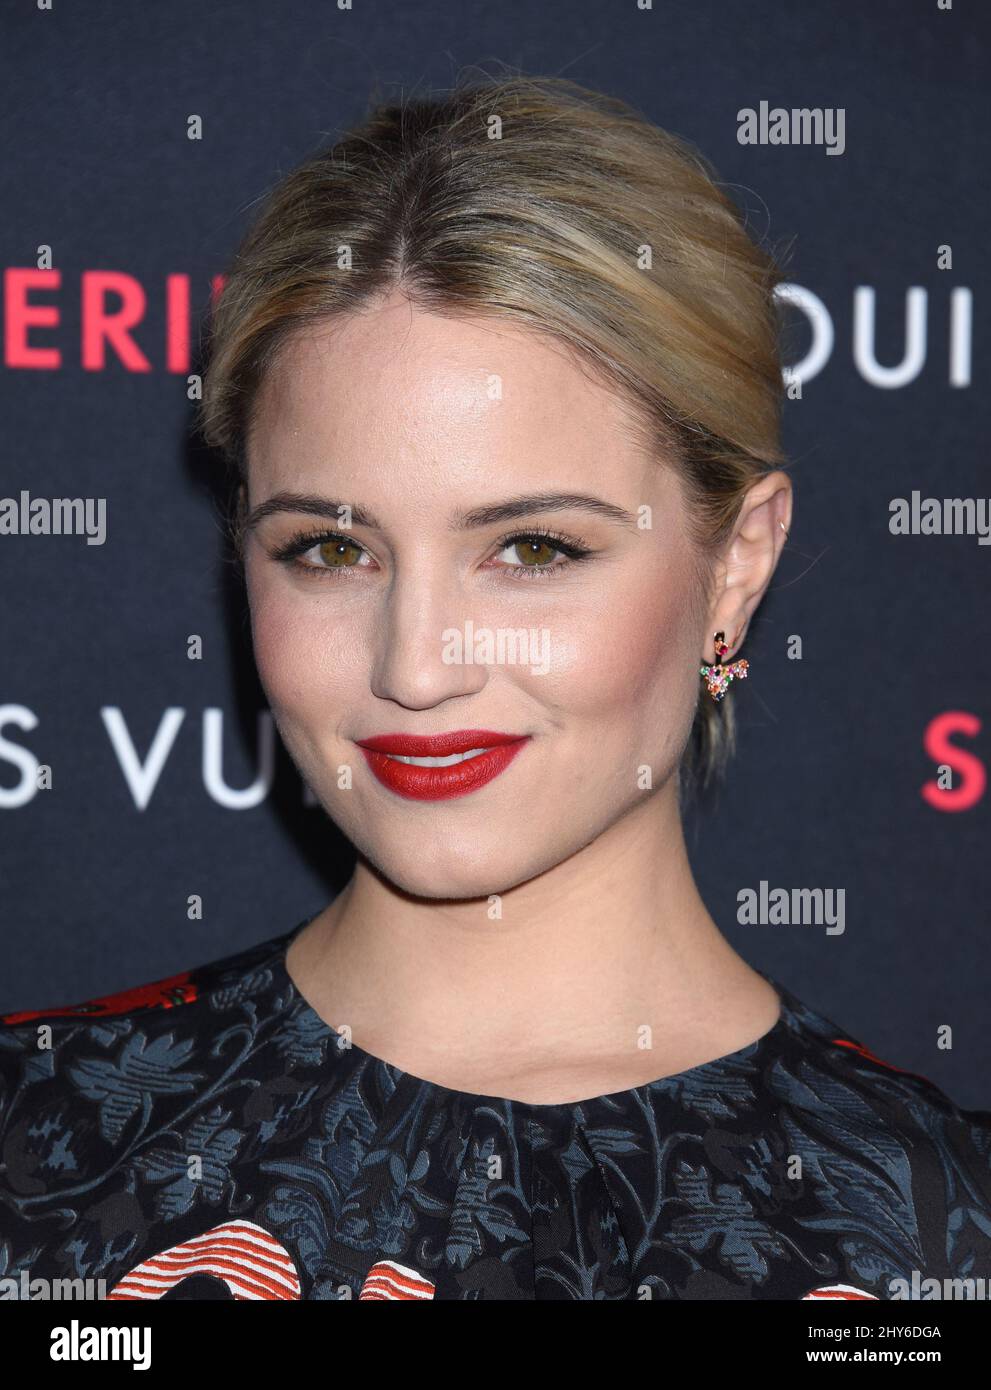 Diana Agron attends an event called, Louis Vuitton unveils an unconventional exhibition, 'SERIES 2 ??? Past, Present and Future'. This exhibition is a modern and unexpected interpretation of a fashion show. February 5, 2015 Los Angeles, Ca. Stock Photo